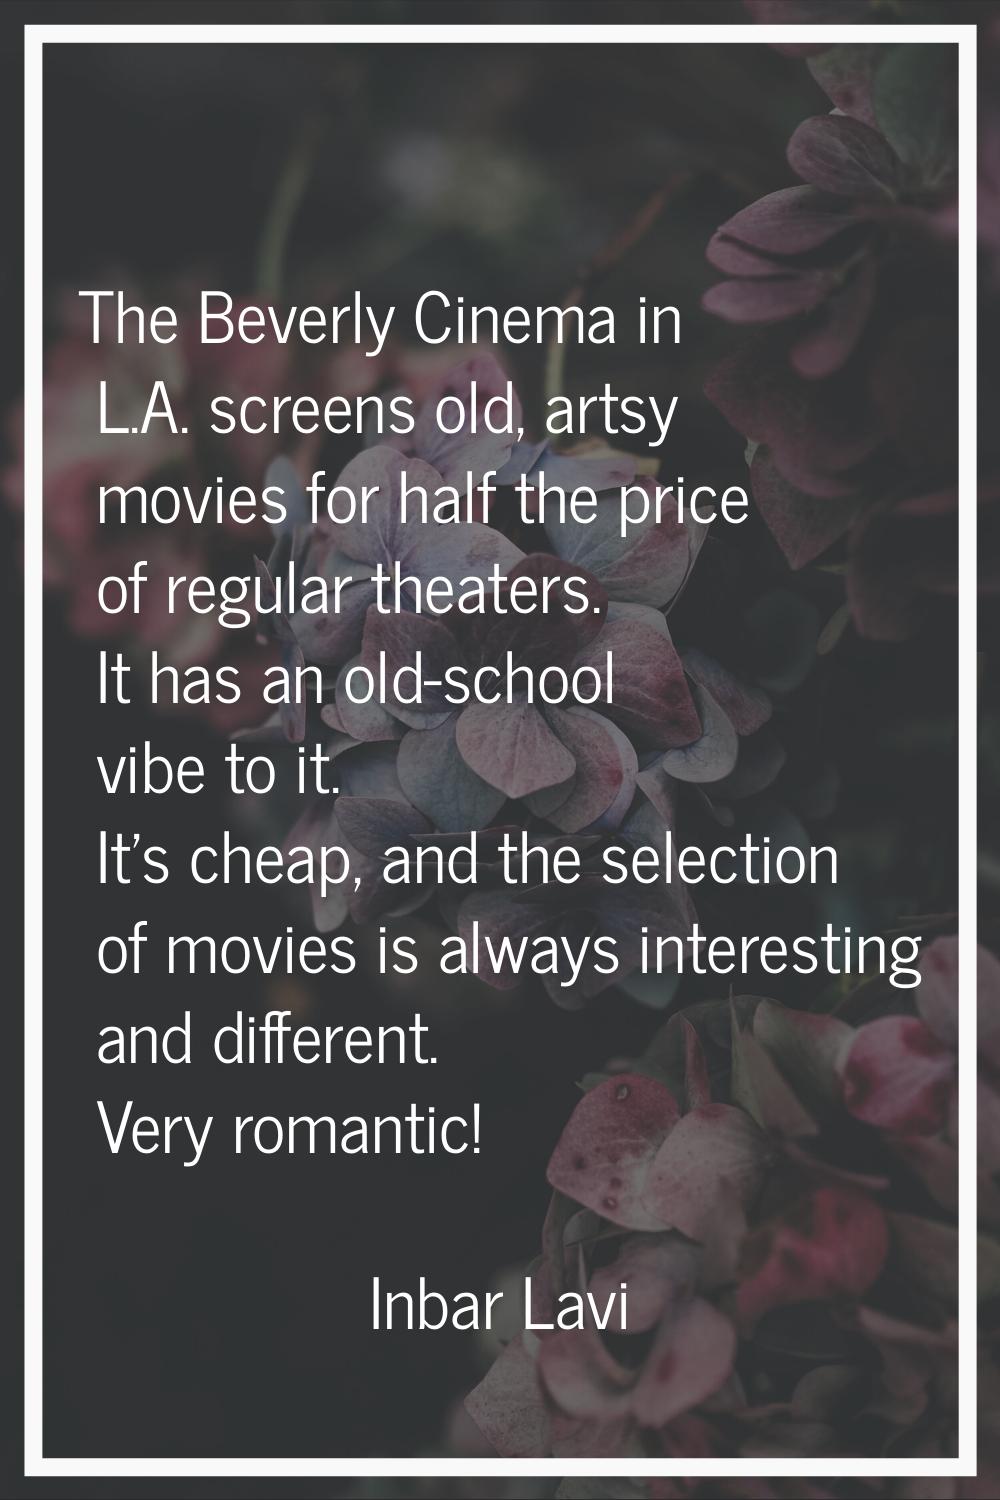 The Beverly Cinema in L.A. screens old, artsy movies for half the price of regular theaters. It has